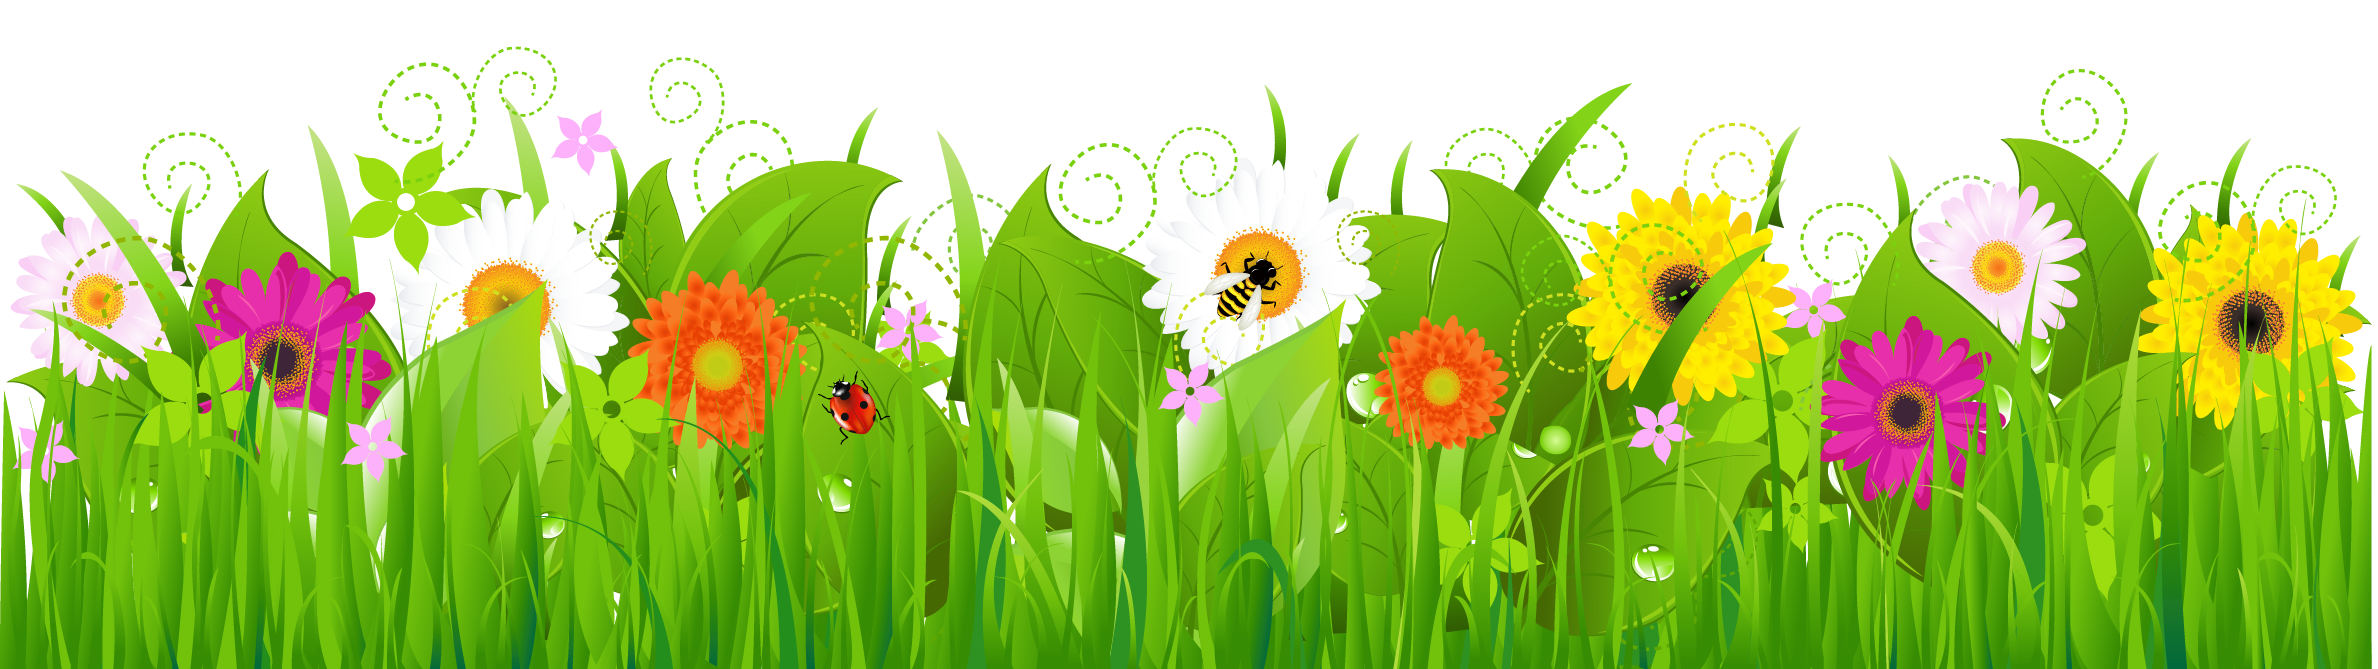 free spring clipart lines - photo #18